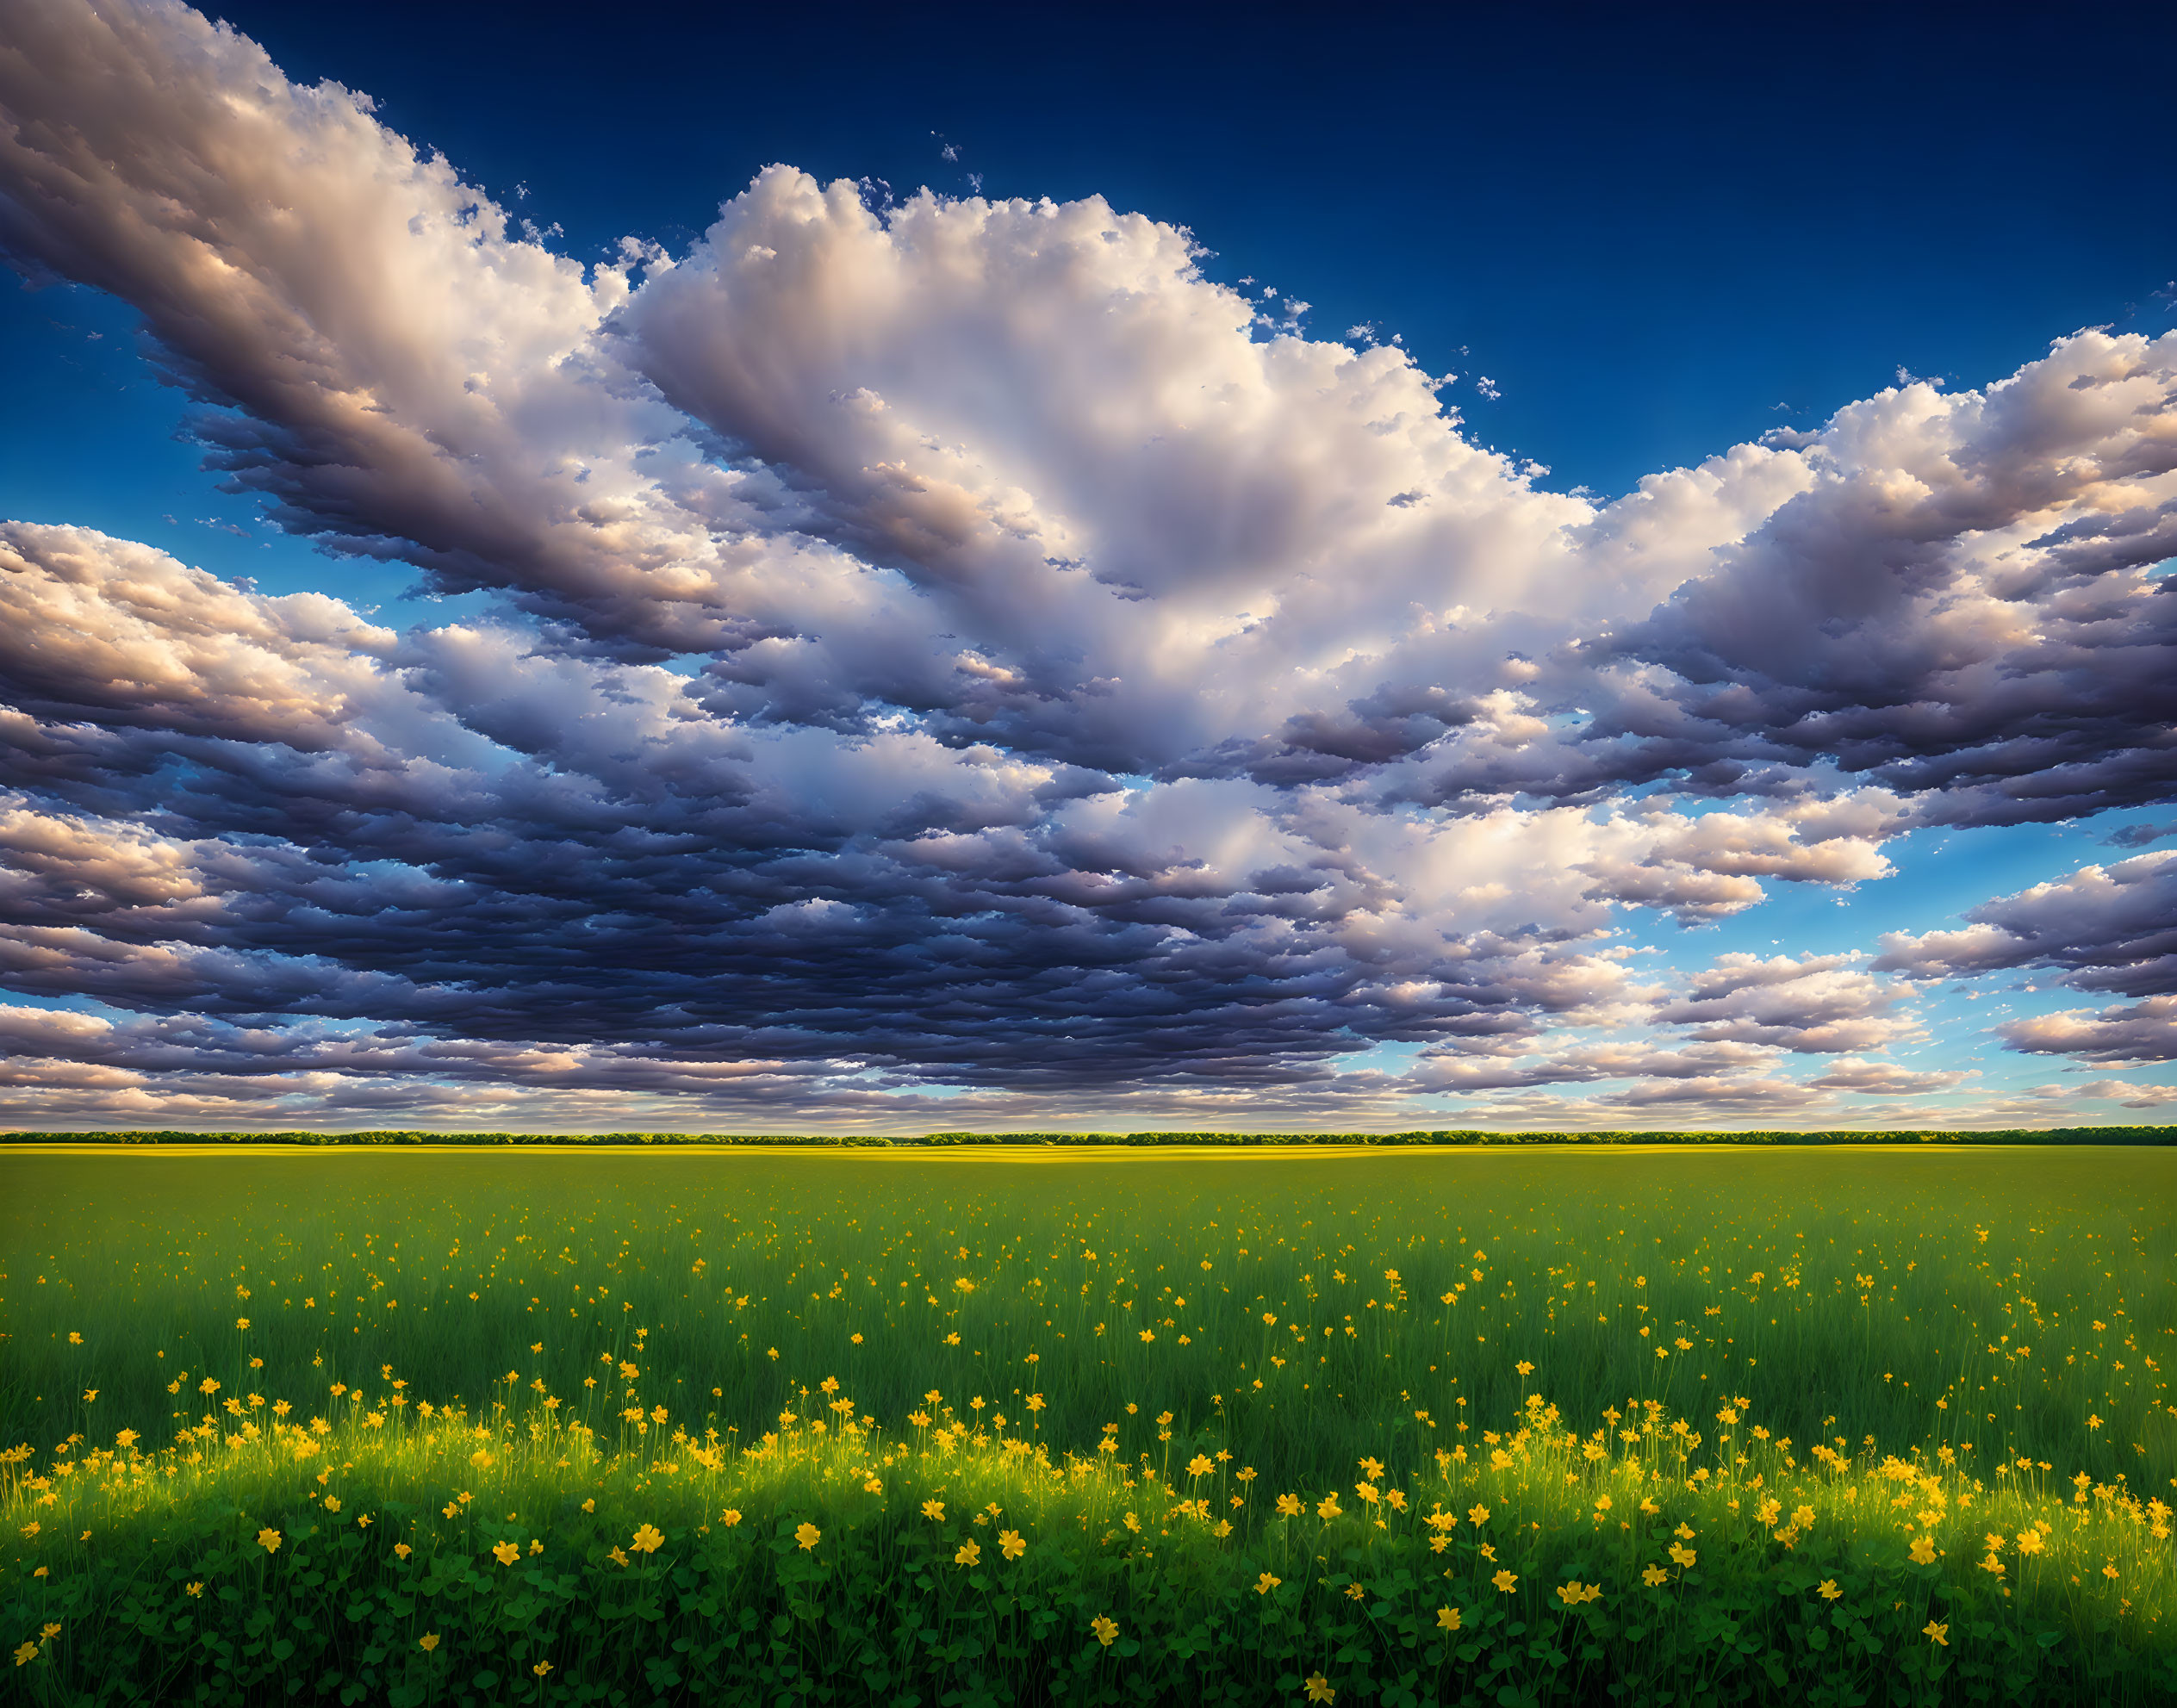 Vibrant green field with yellow flowers under dramatic sky